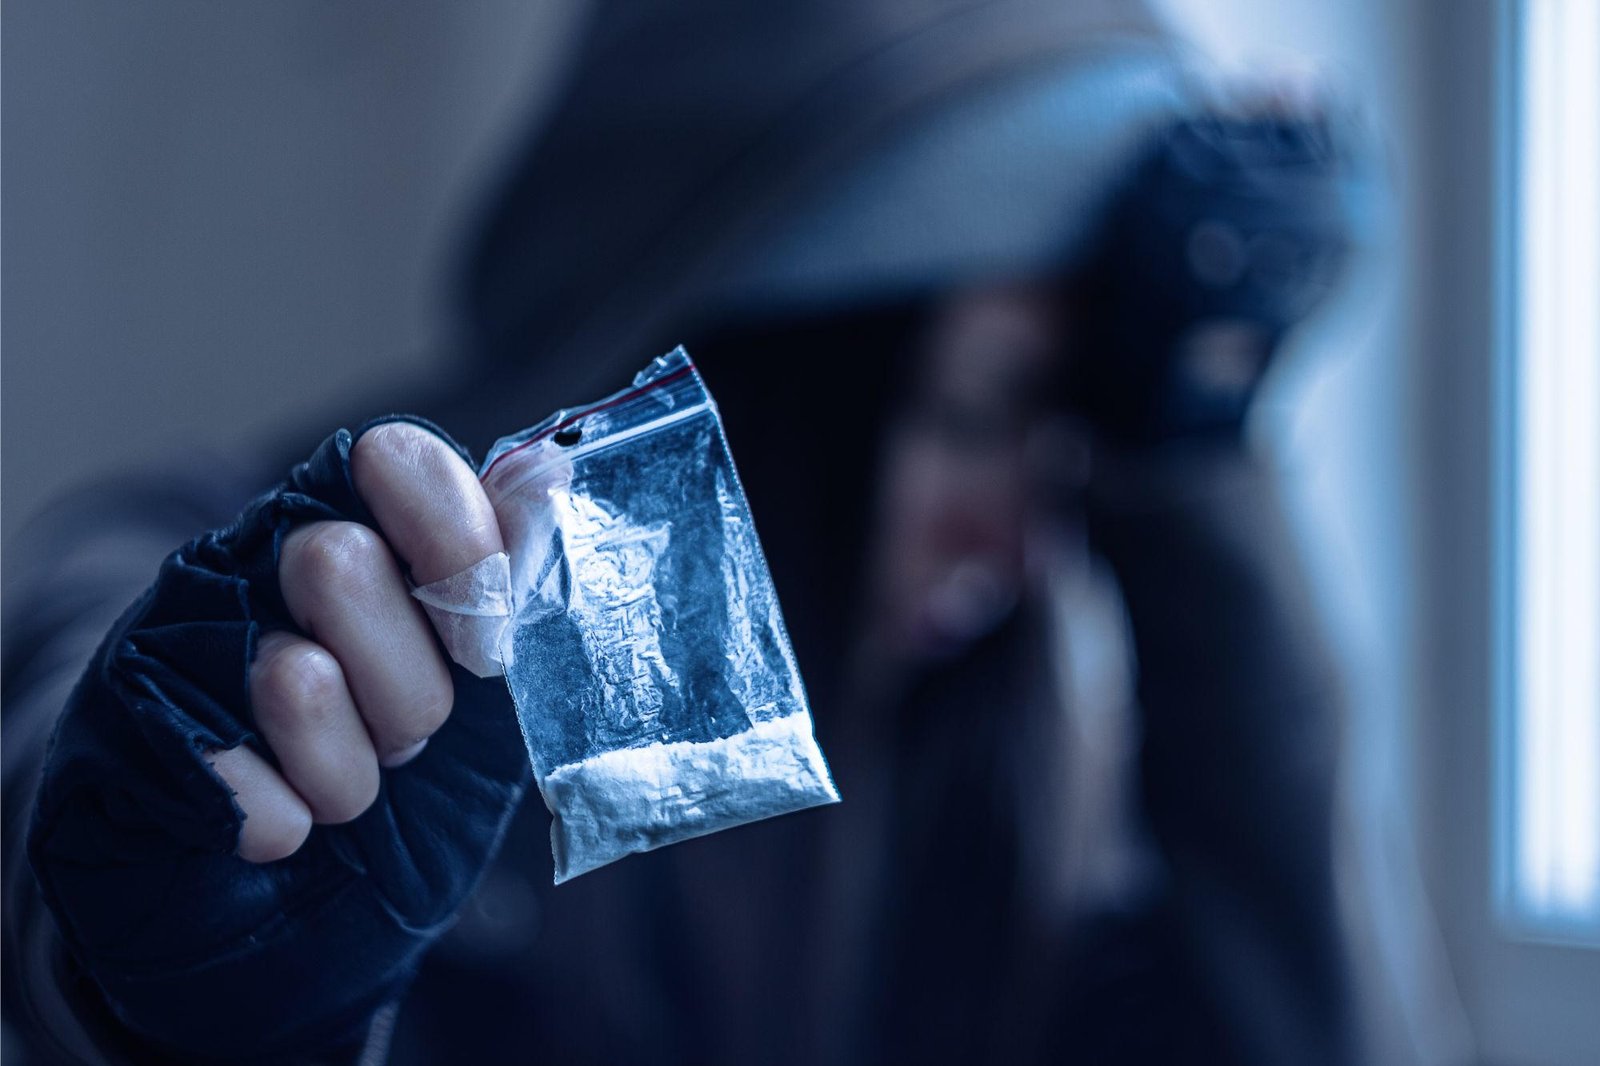 More Than 1/3 of Illicit Drugs Sold on the Dark Web Contain Unexpected Substances, According to New Study